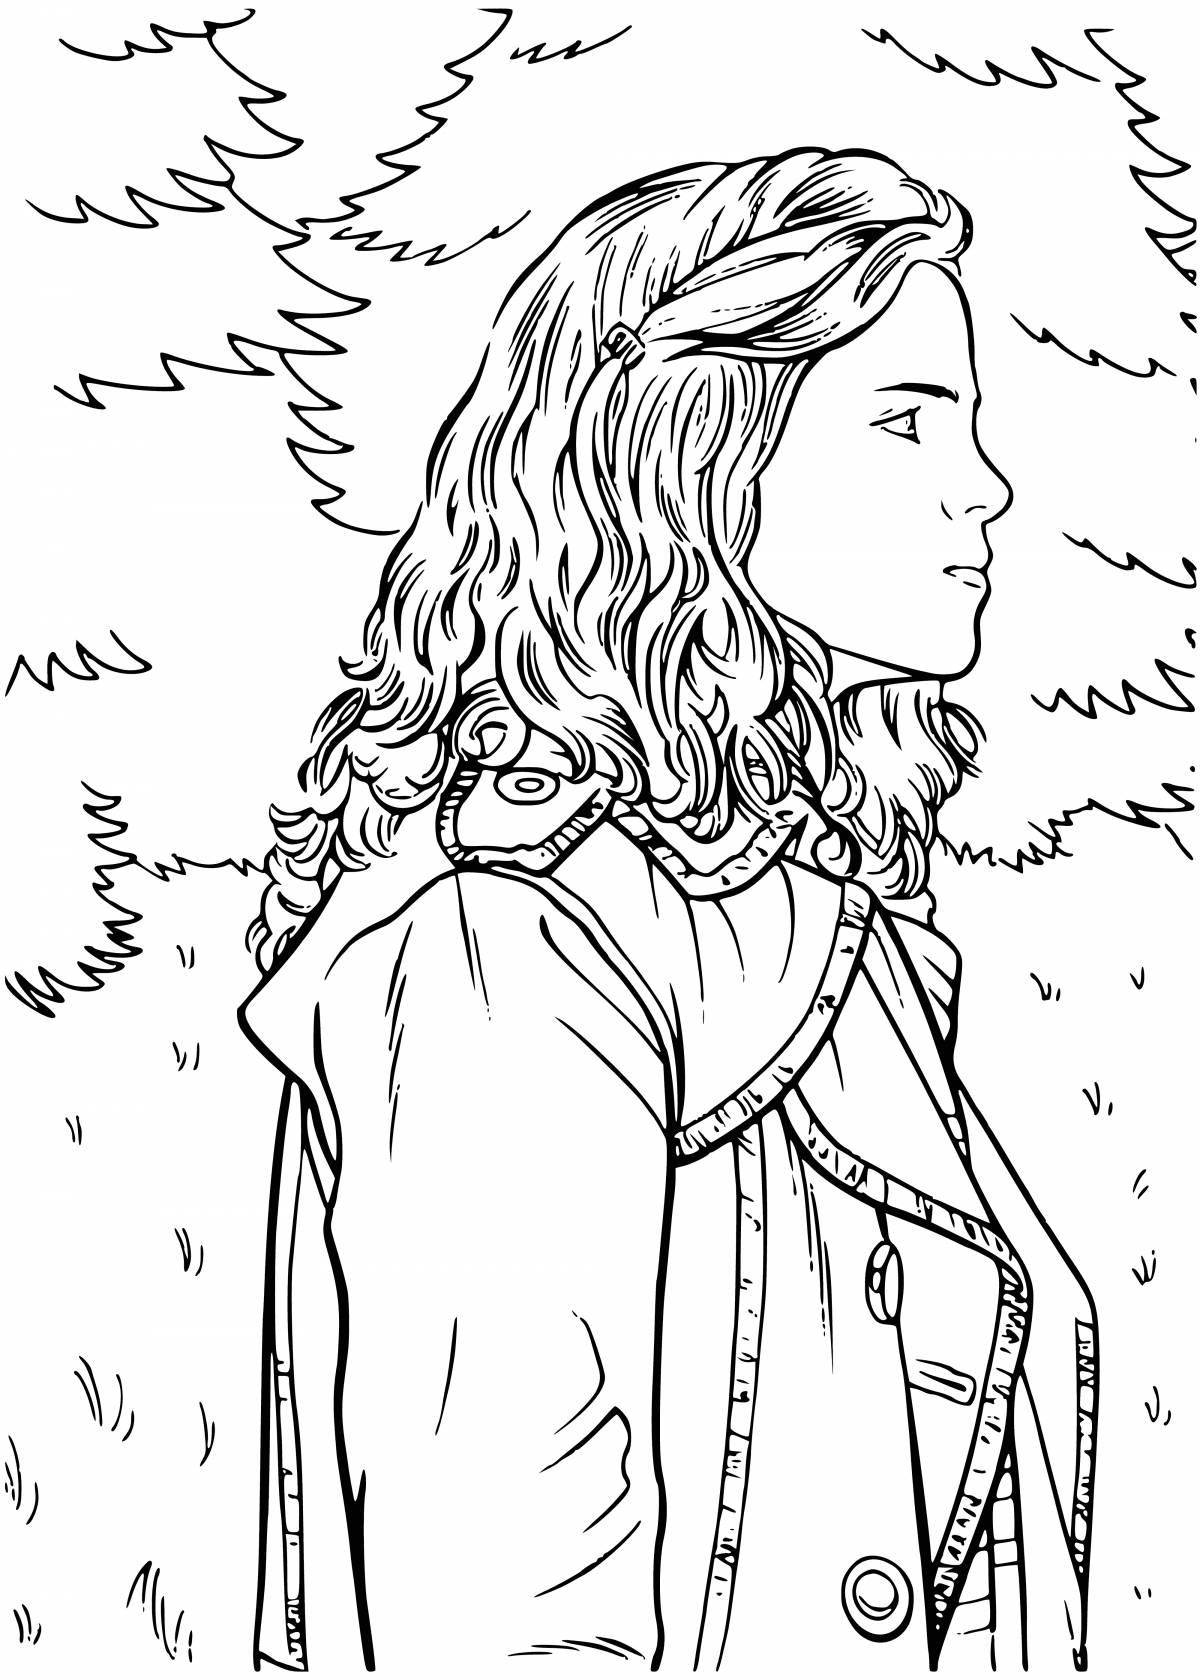 Hermione granger's animated coloring page